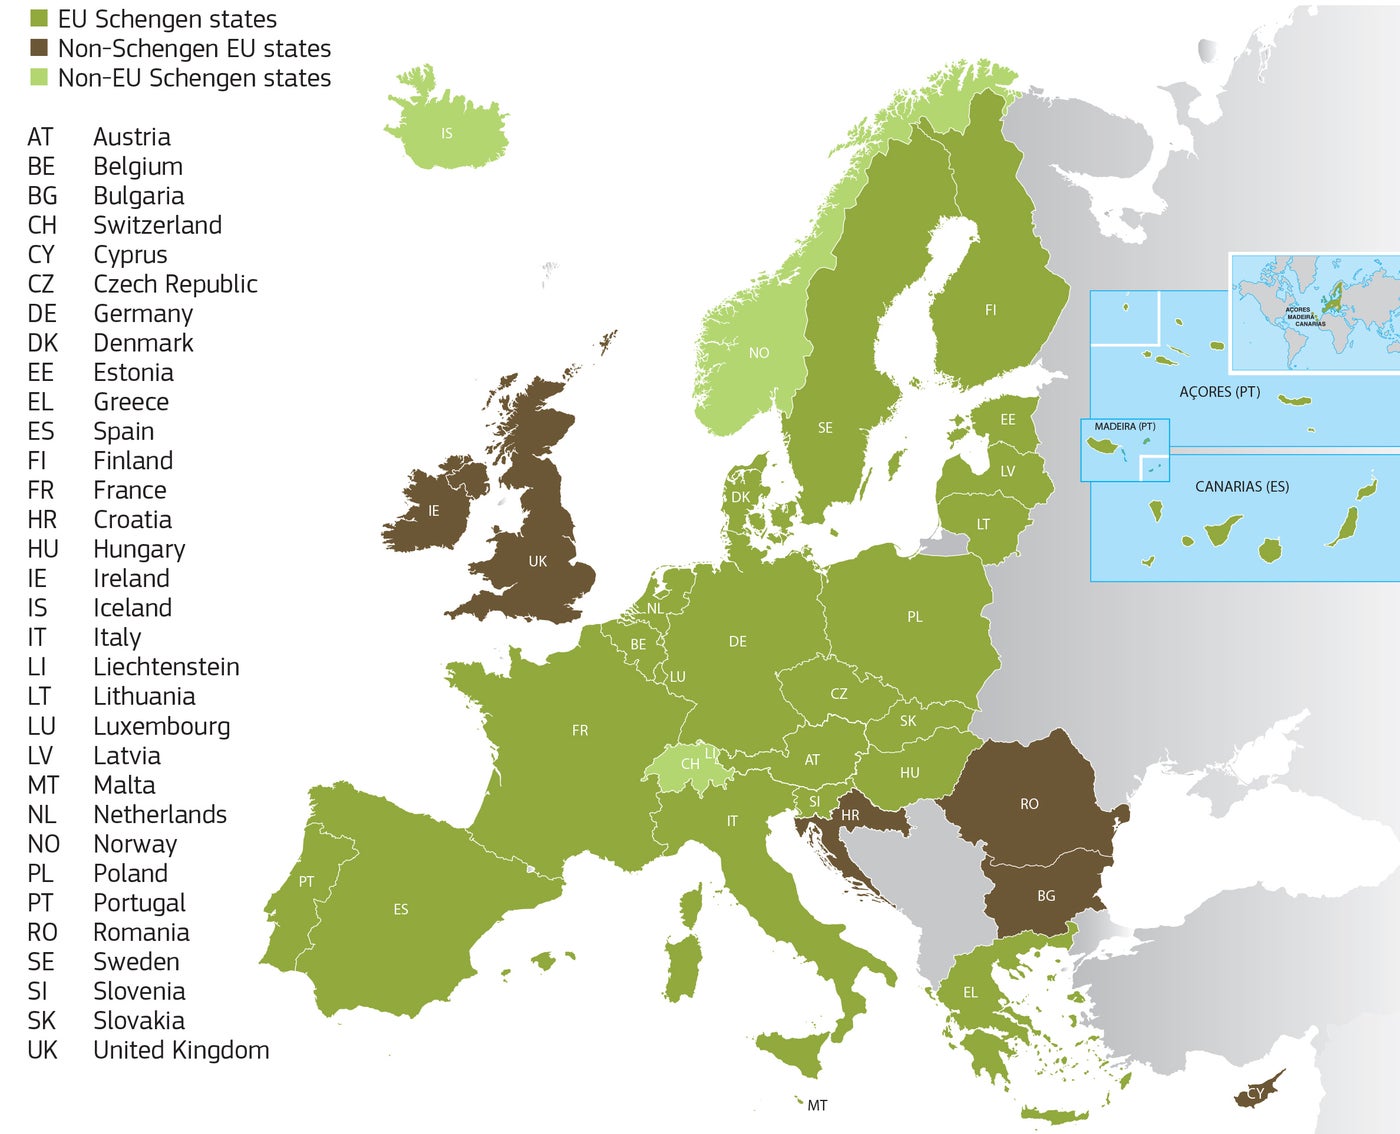 What is the Schengen Area and what European countries are included?